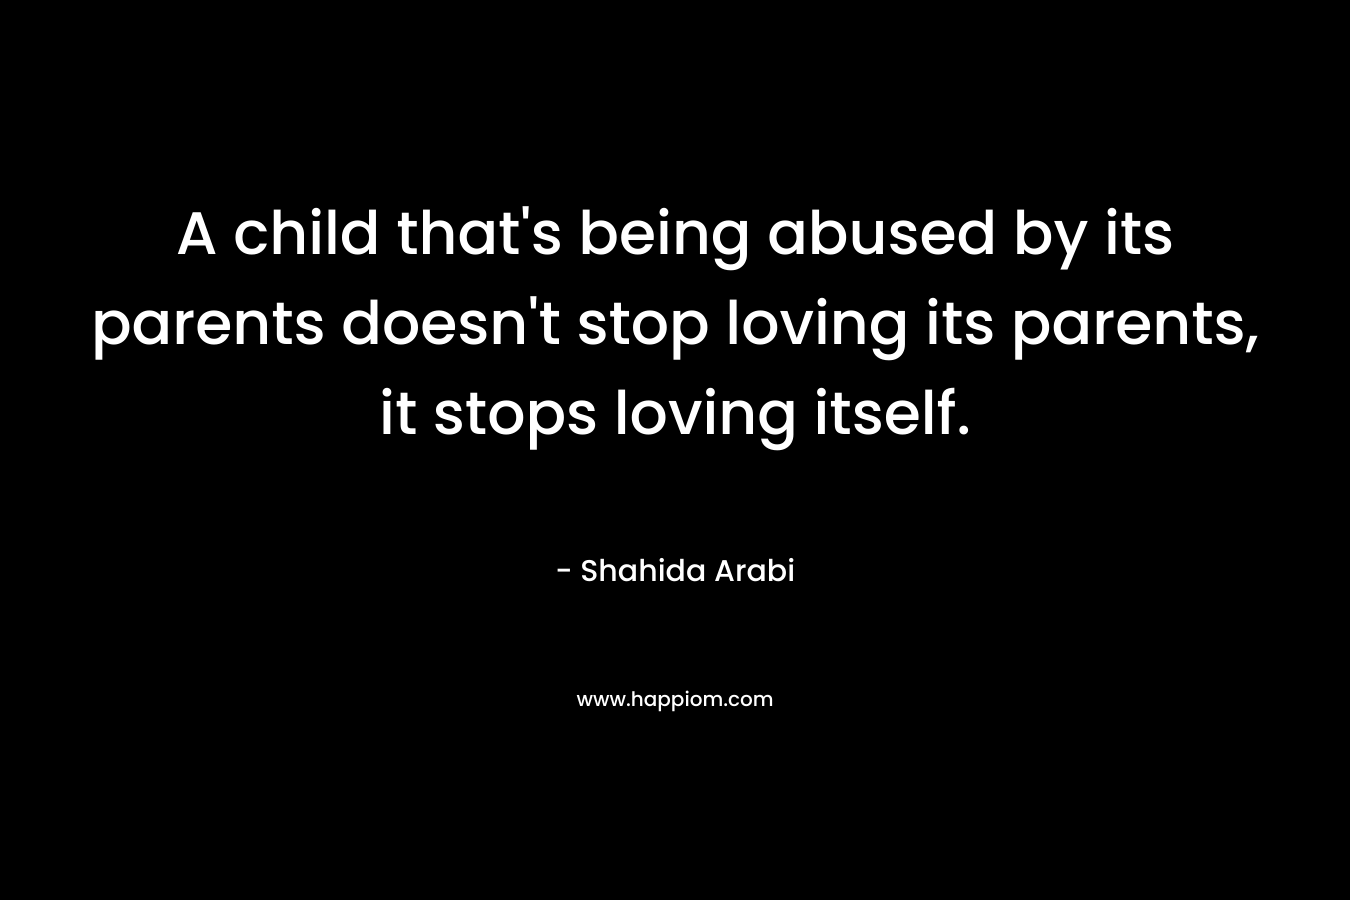 A child that's being abused by its parents doesn't stop loving its parents, it stops loving itself.